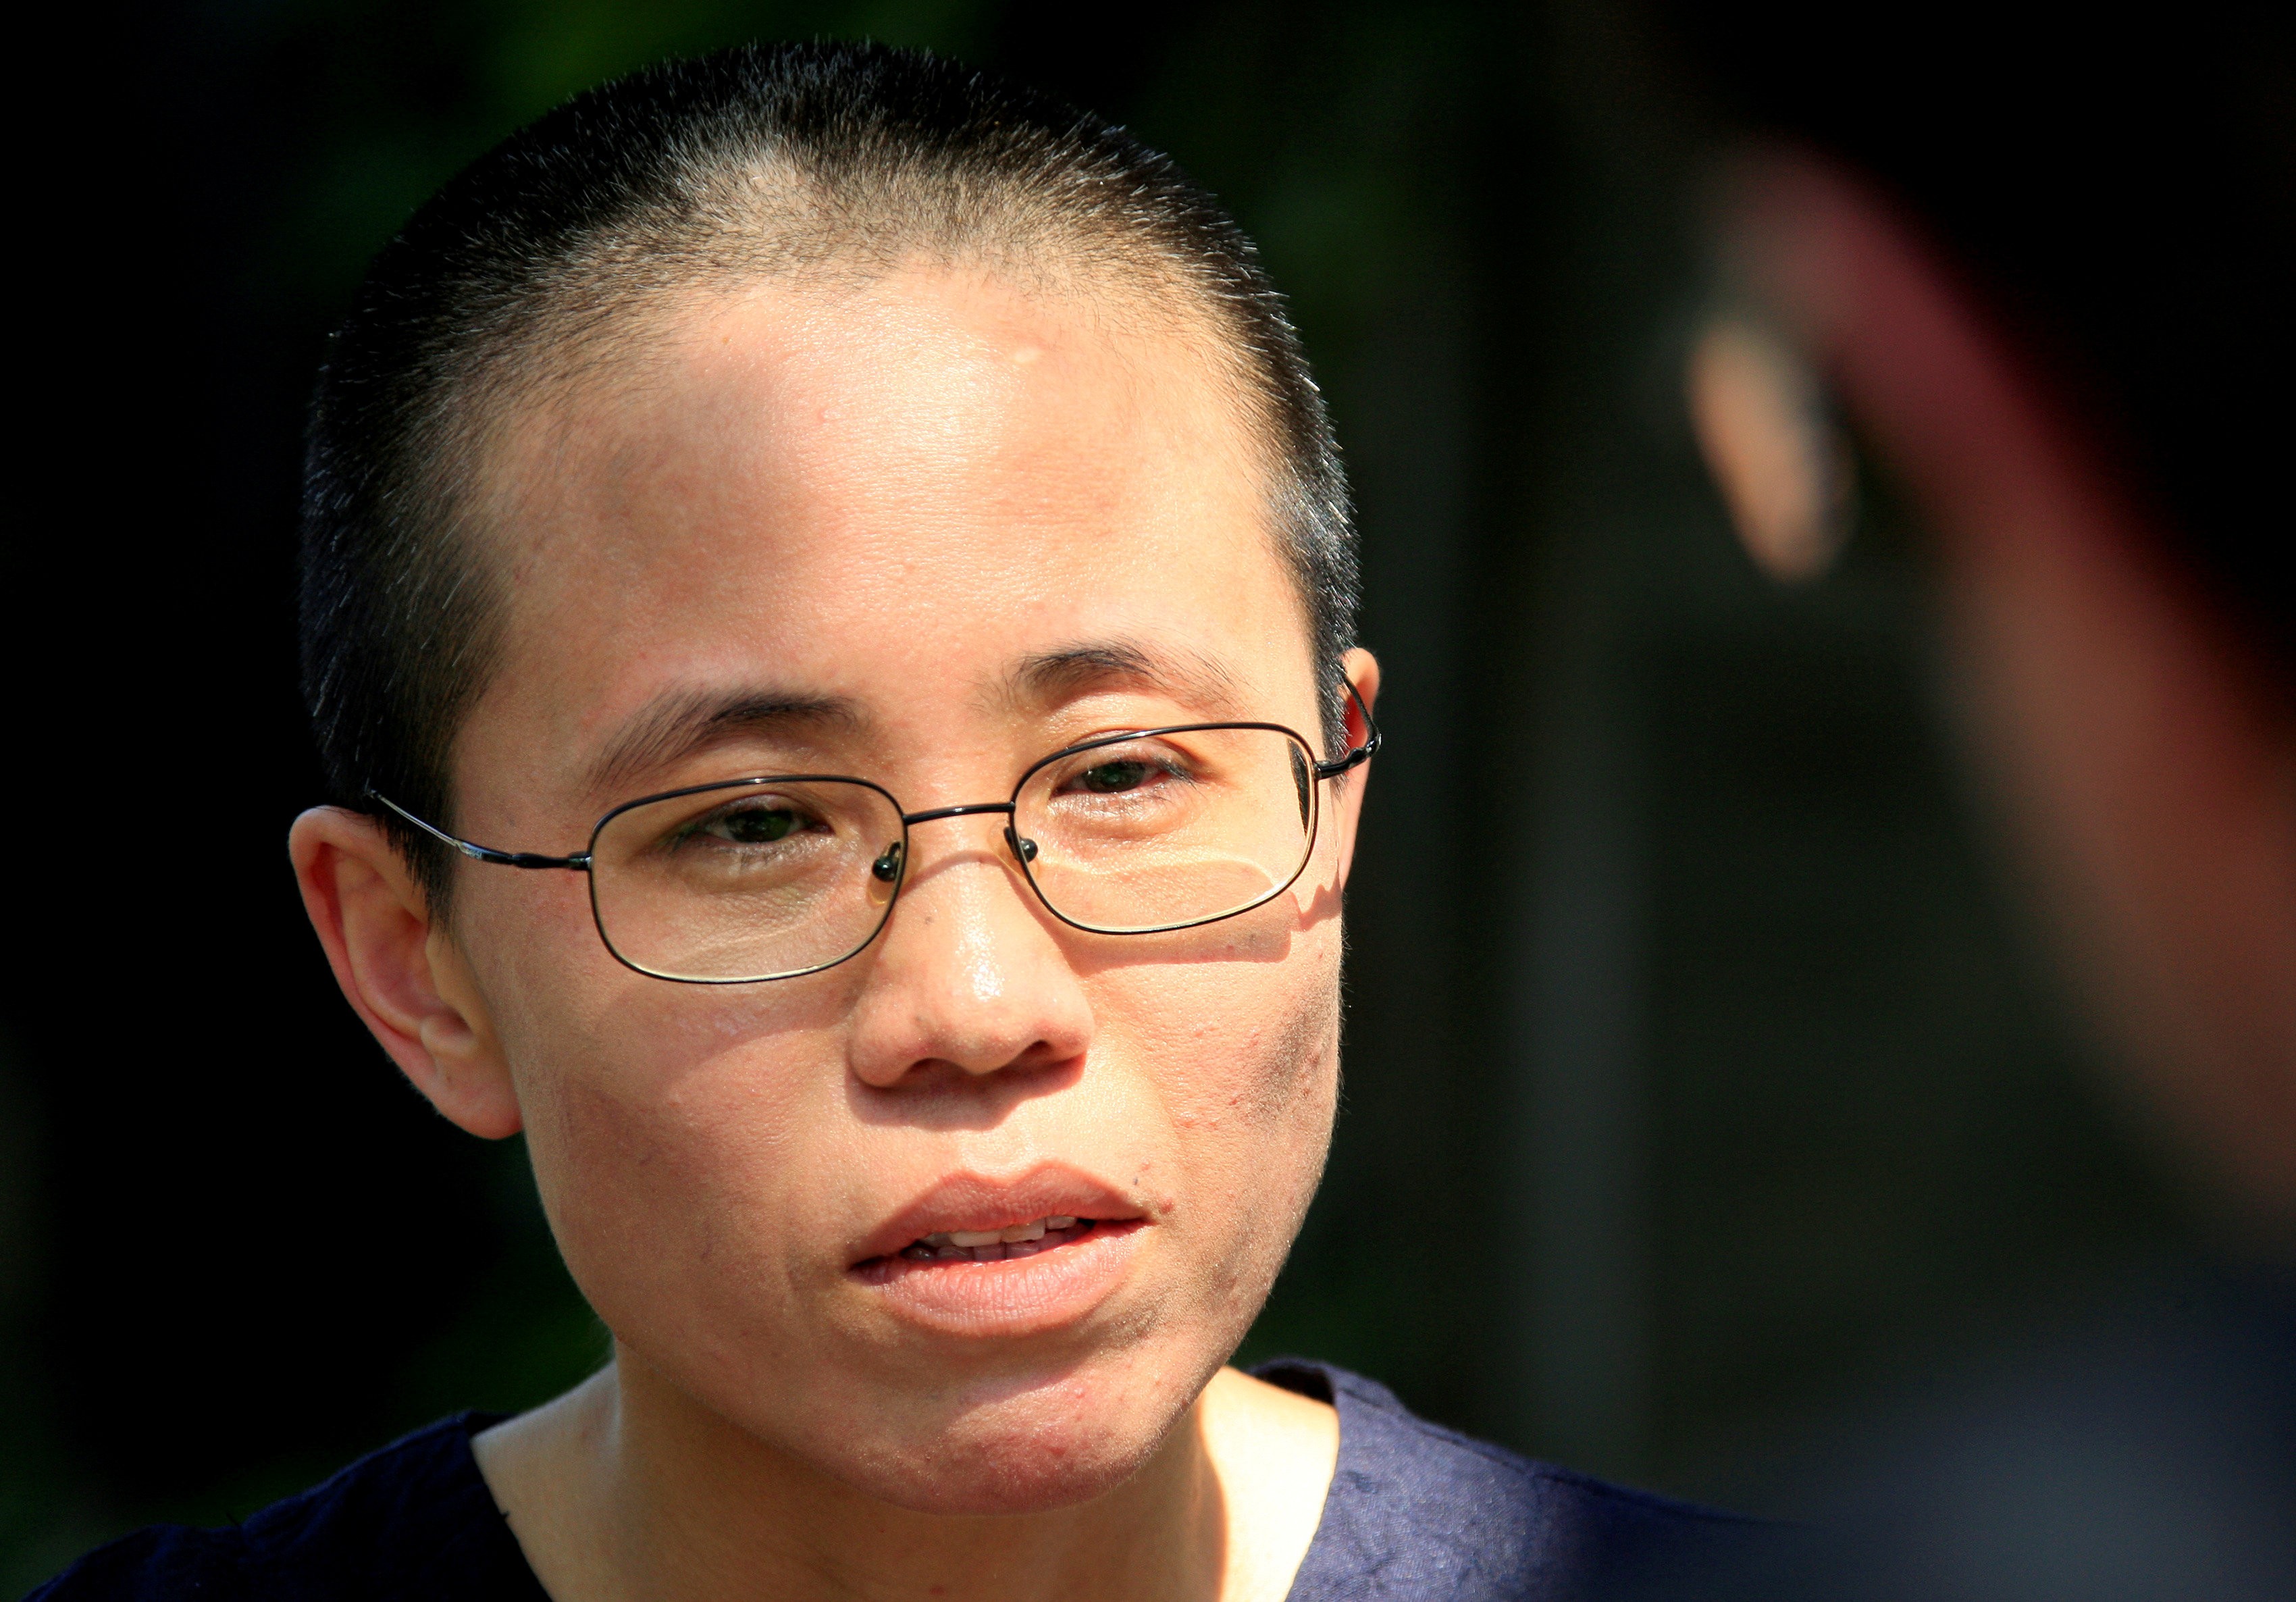 With the widow of Liu Xiaobo now in Germany, Beijing must think again on how it handles rights activists amid global tensions and a growing US trade war